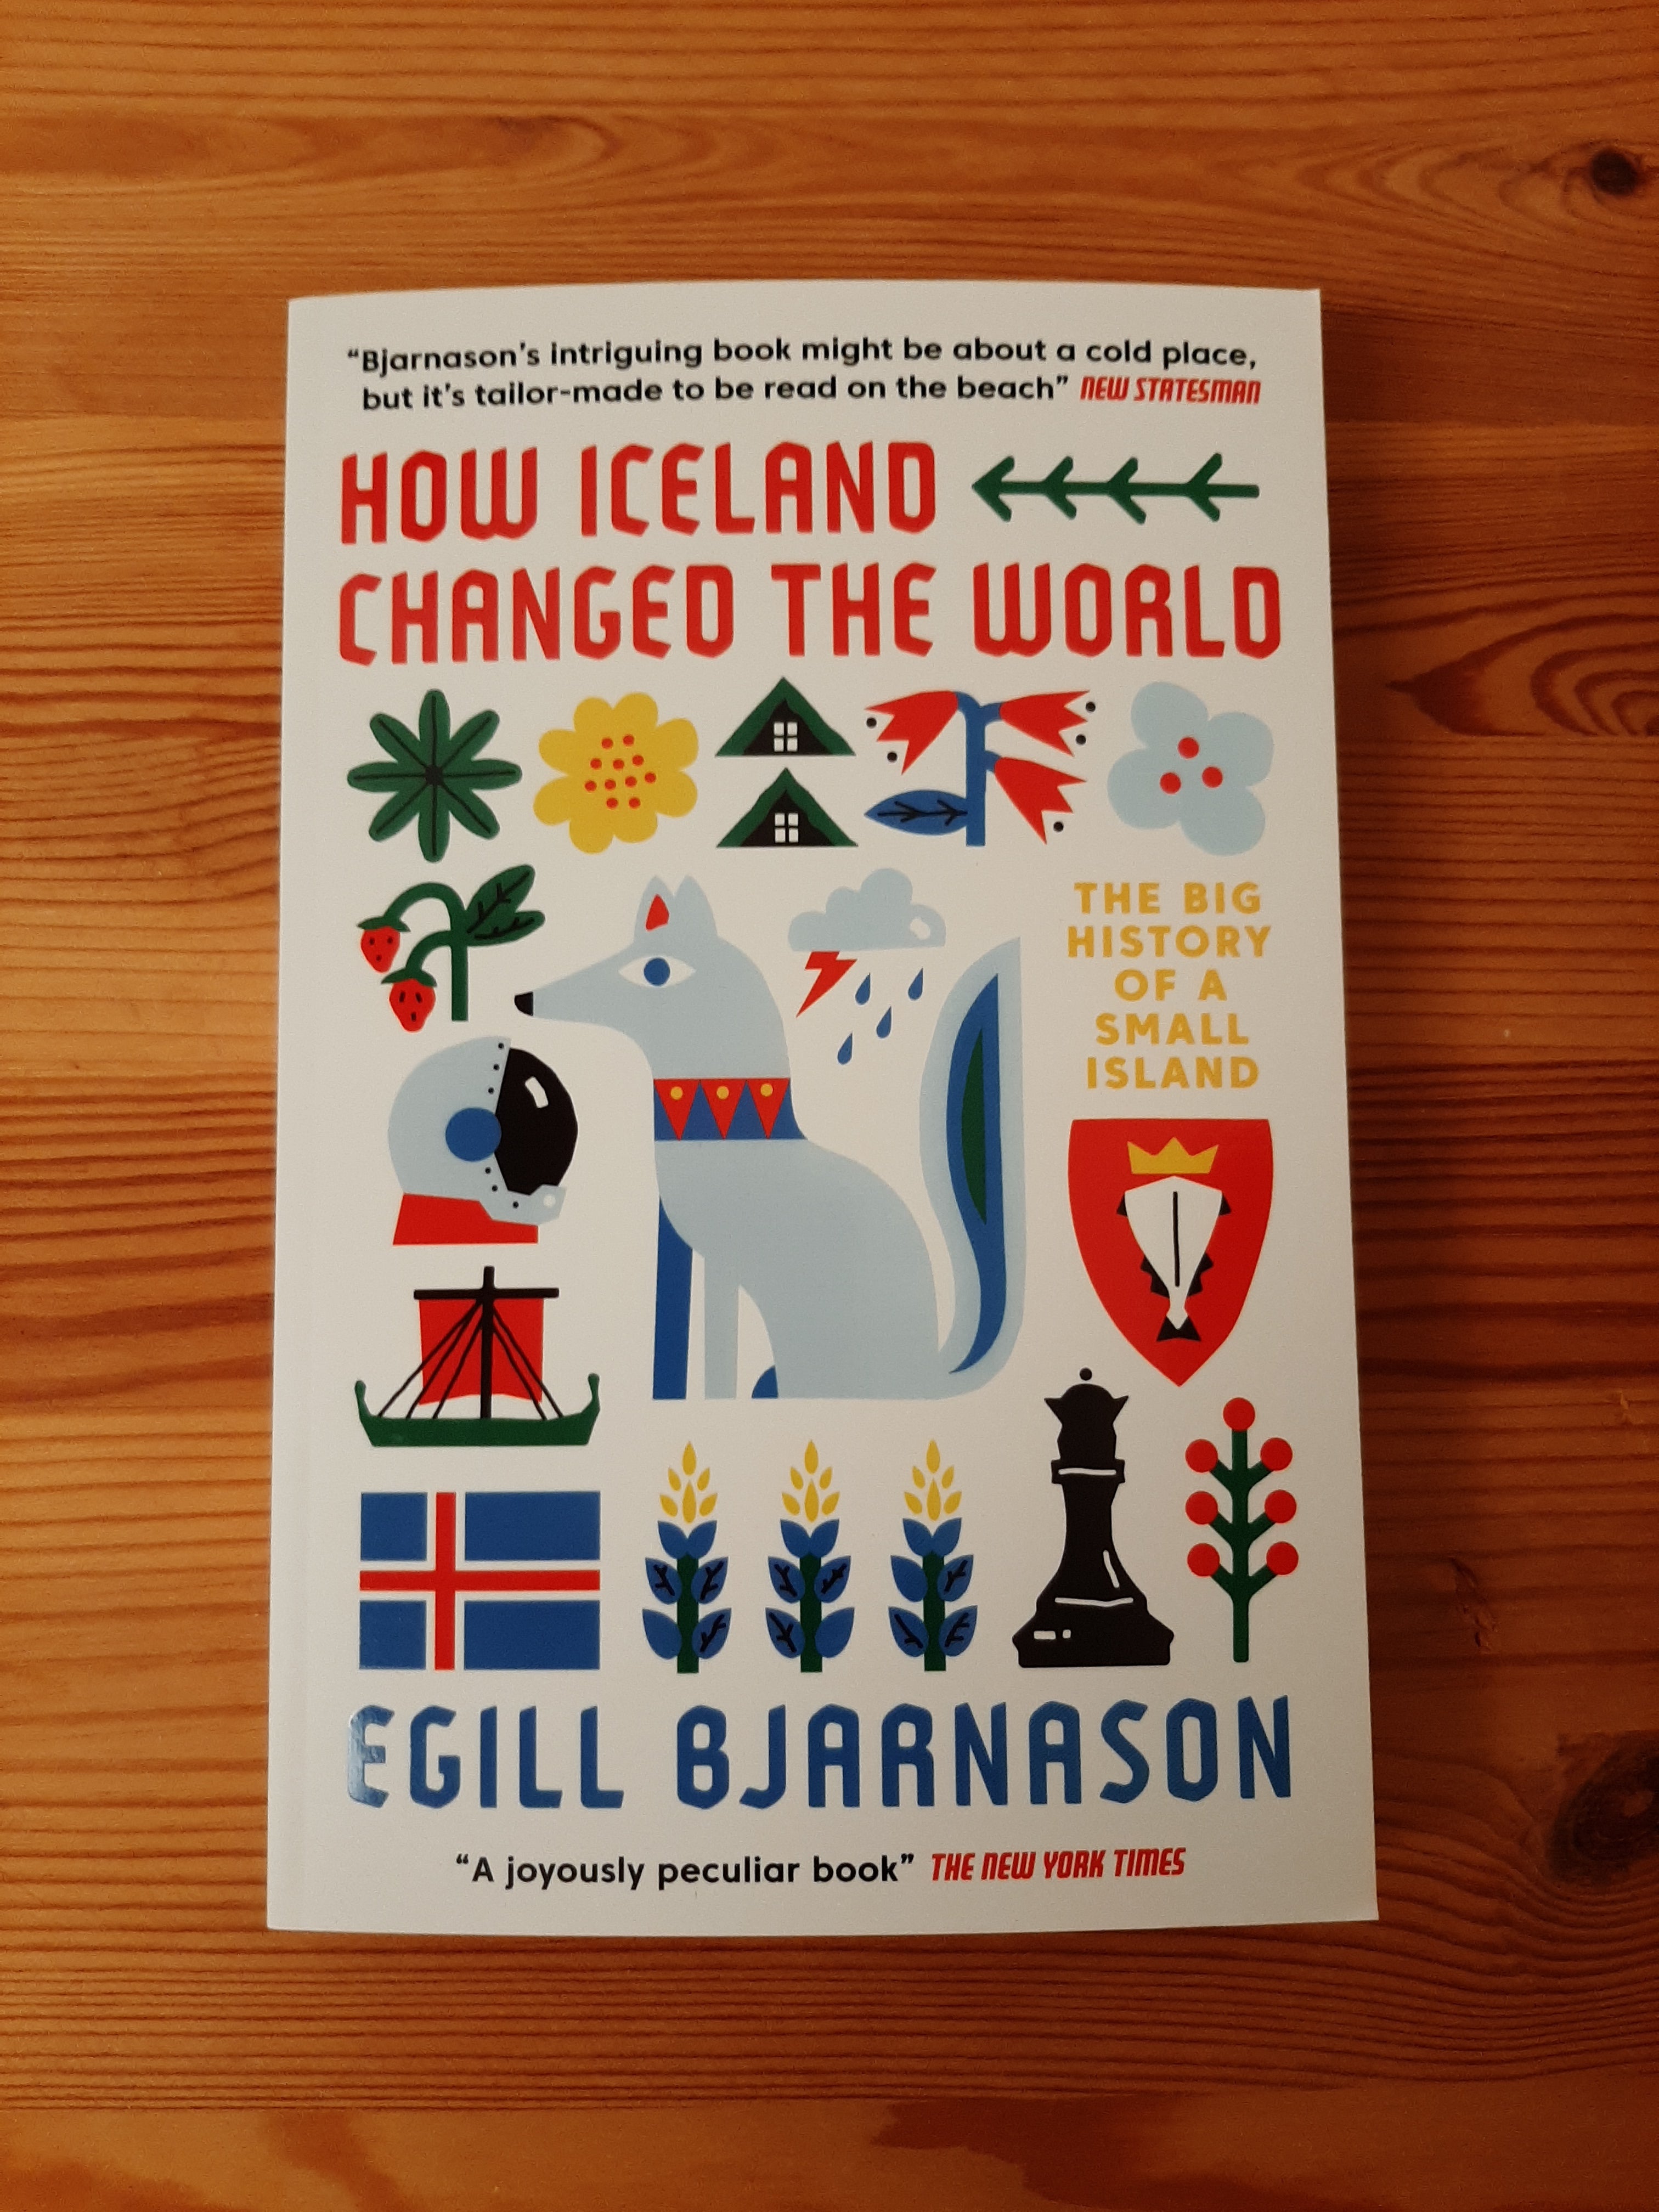 How Iceland changed the world: the big history of a small island